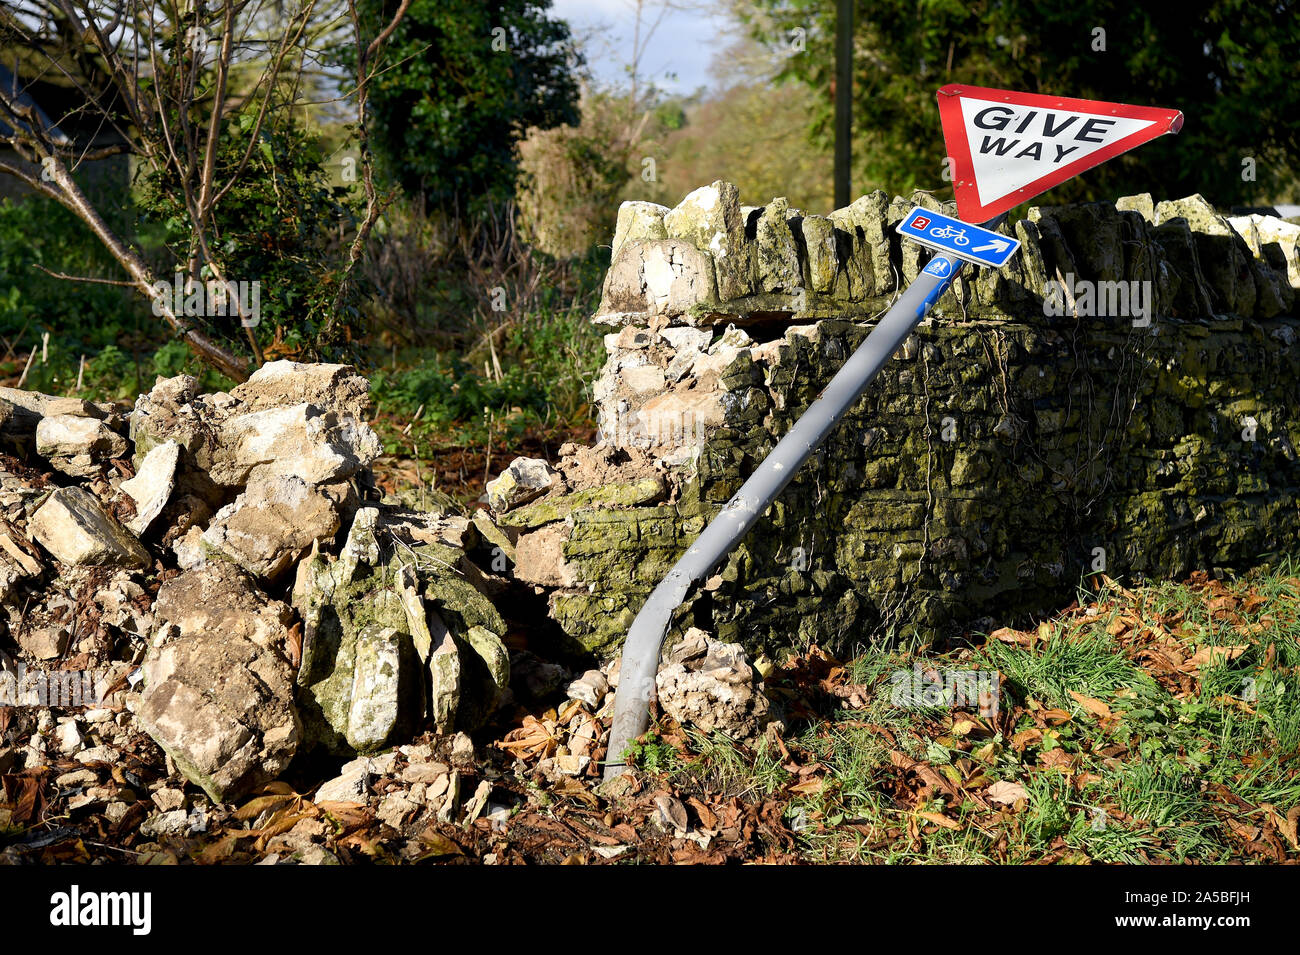 Give Way sign and wall that has been knocked down, England Stock Photo